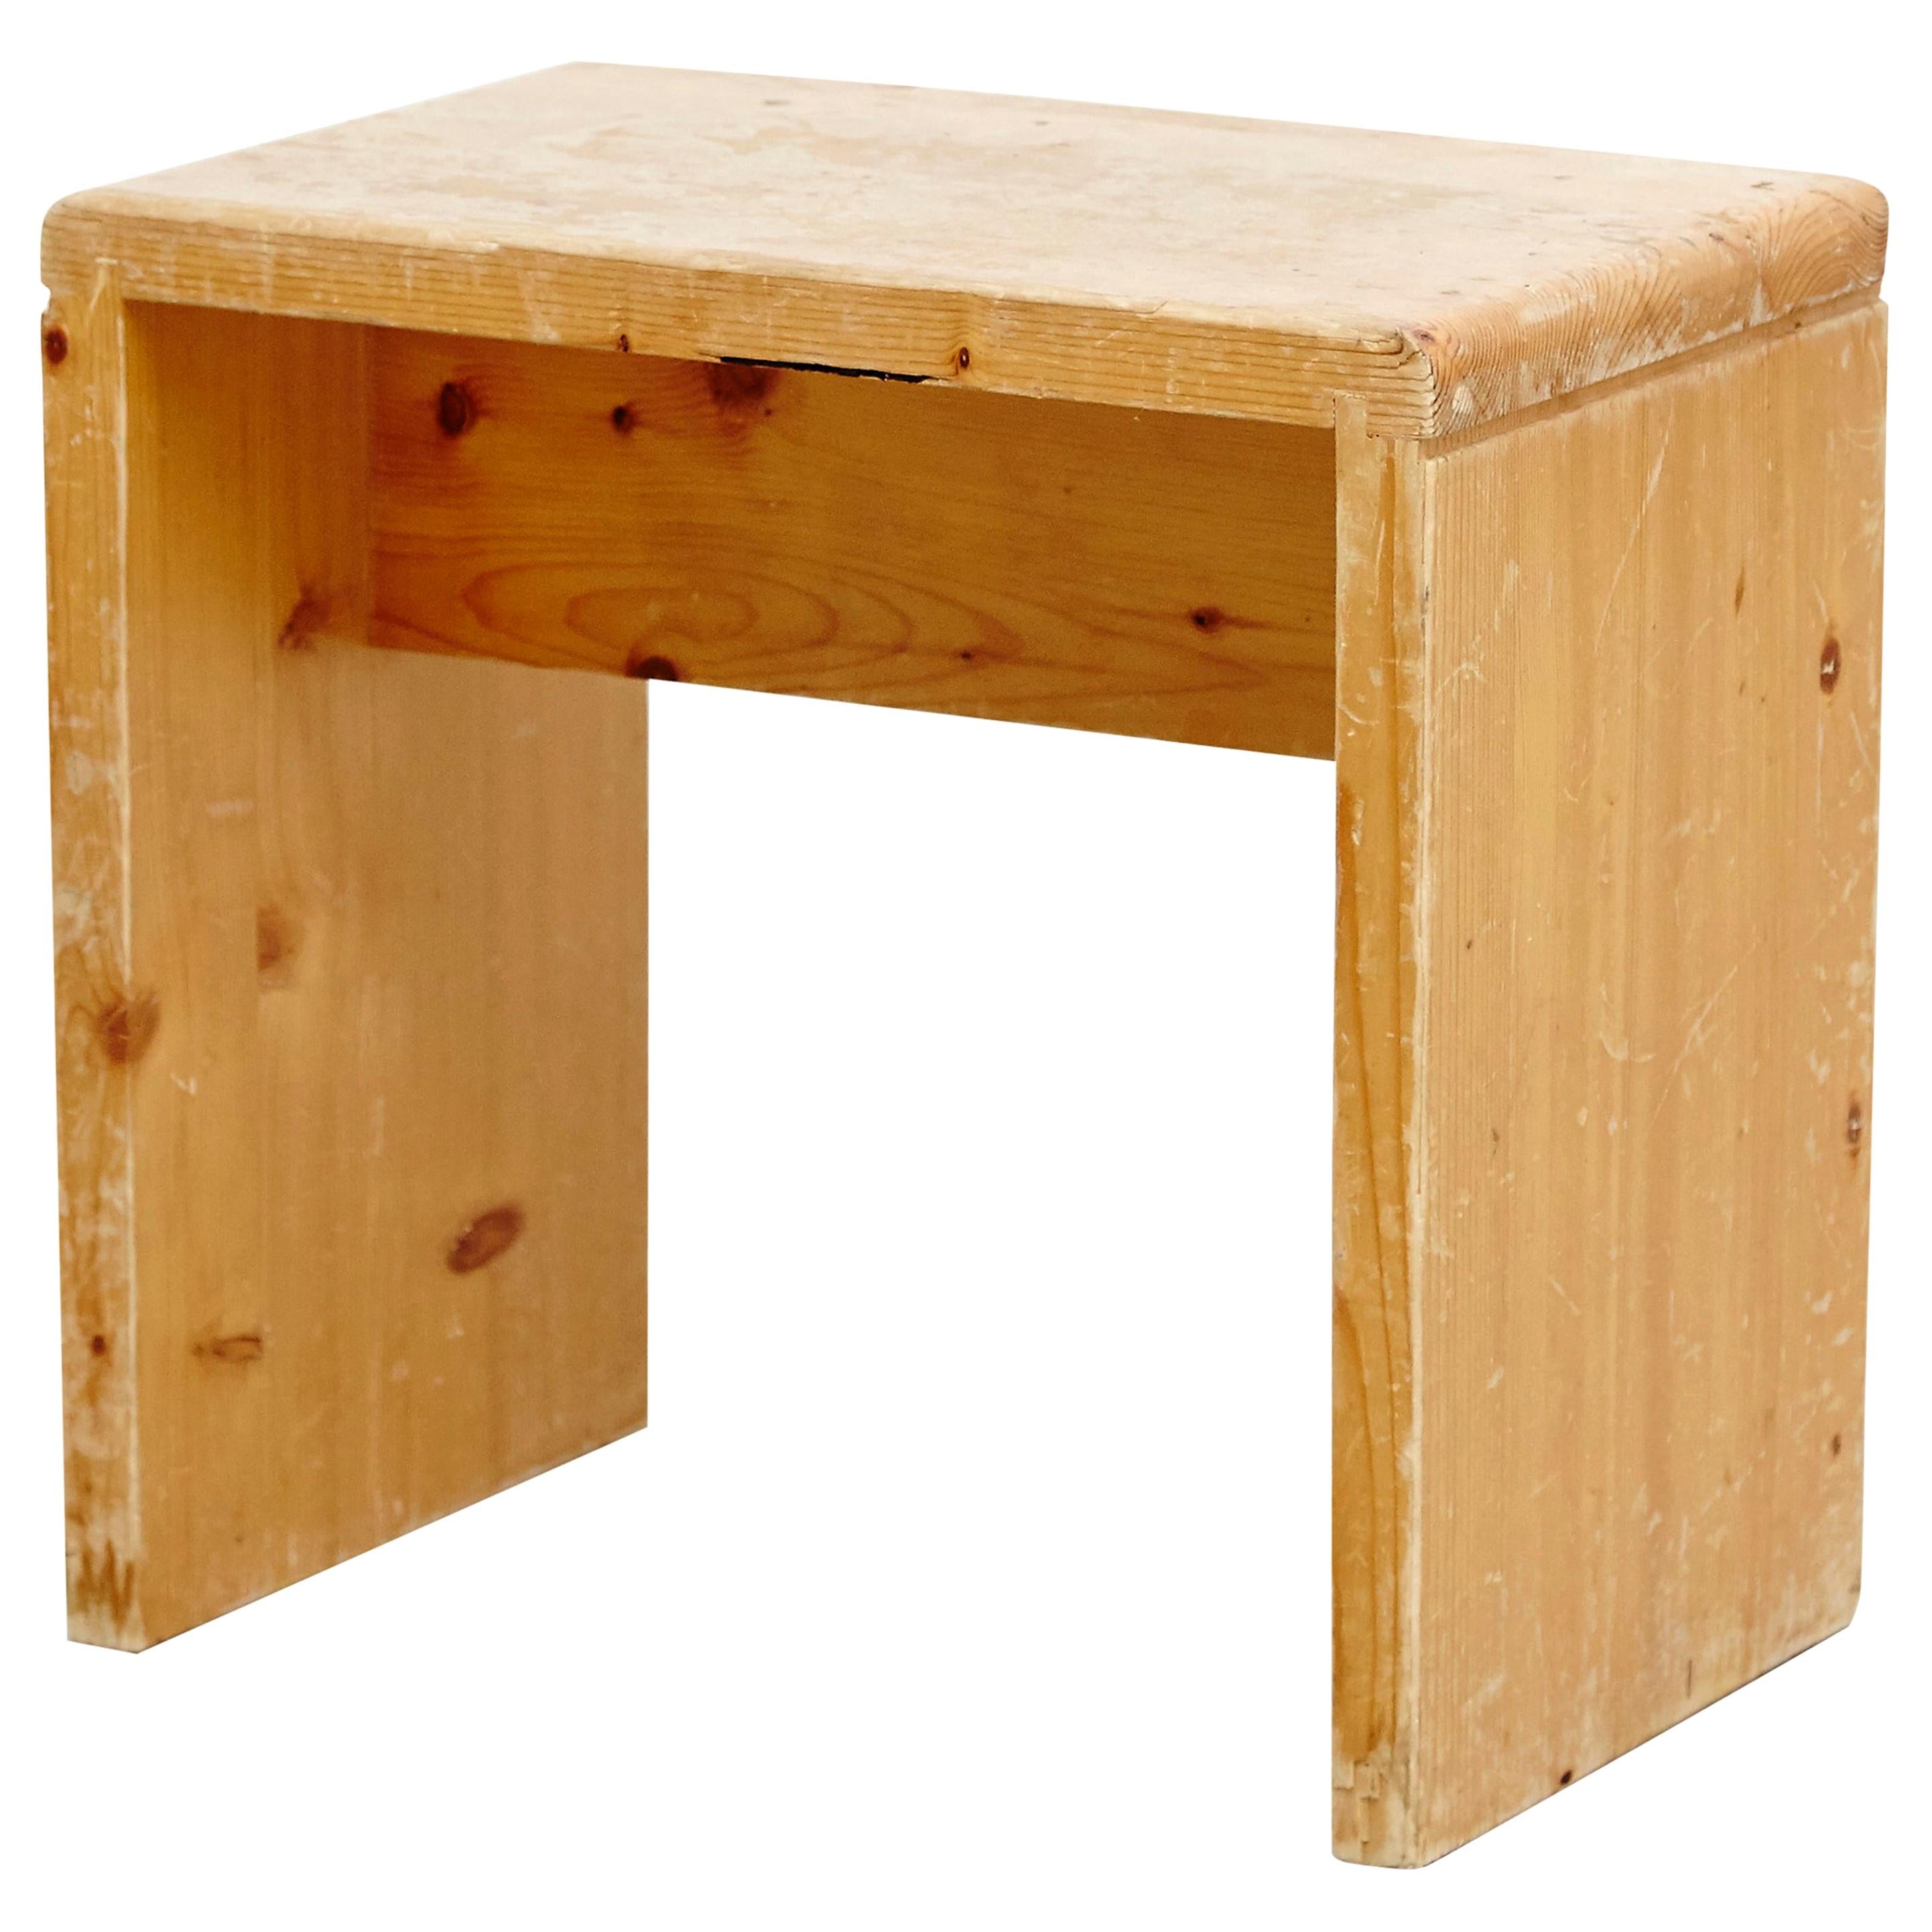 Charlotte Perriand Mid-Century Modern Pine Wood Stool for Les Arcs